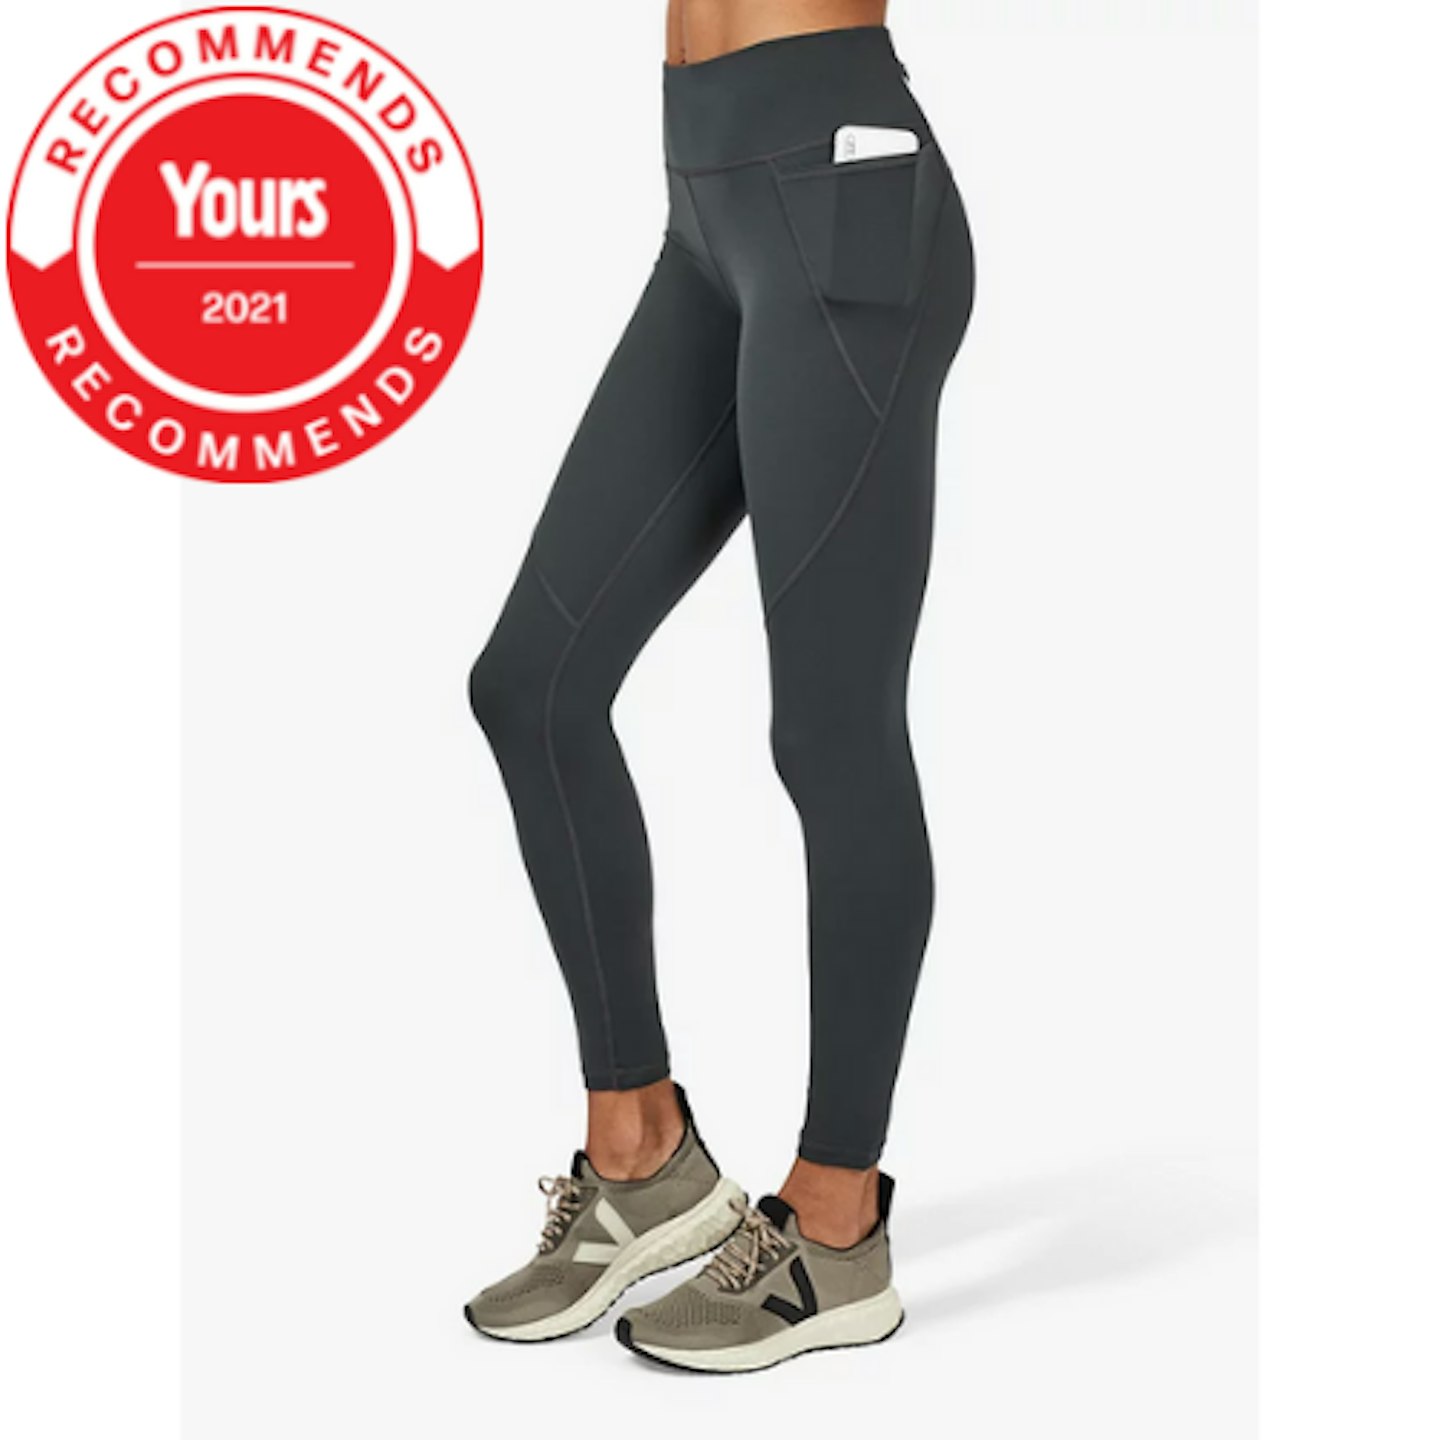 The best gym leggings for every shape and style